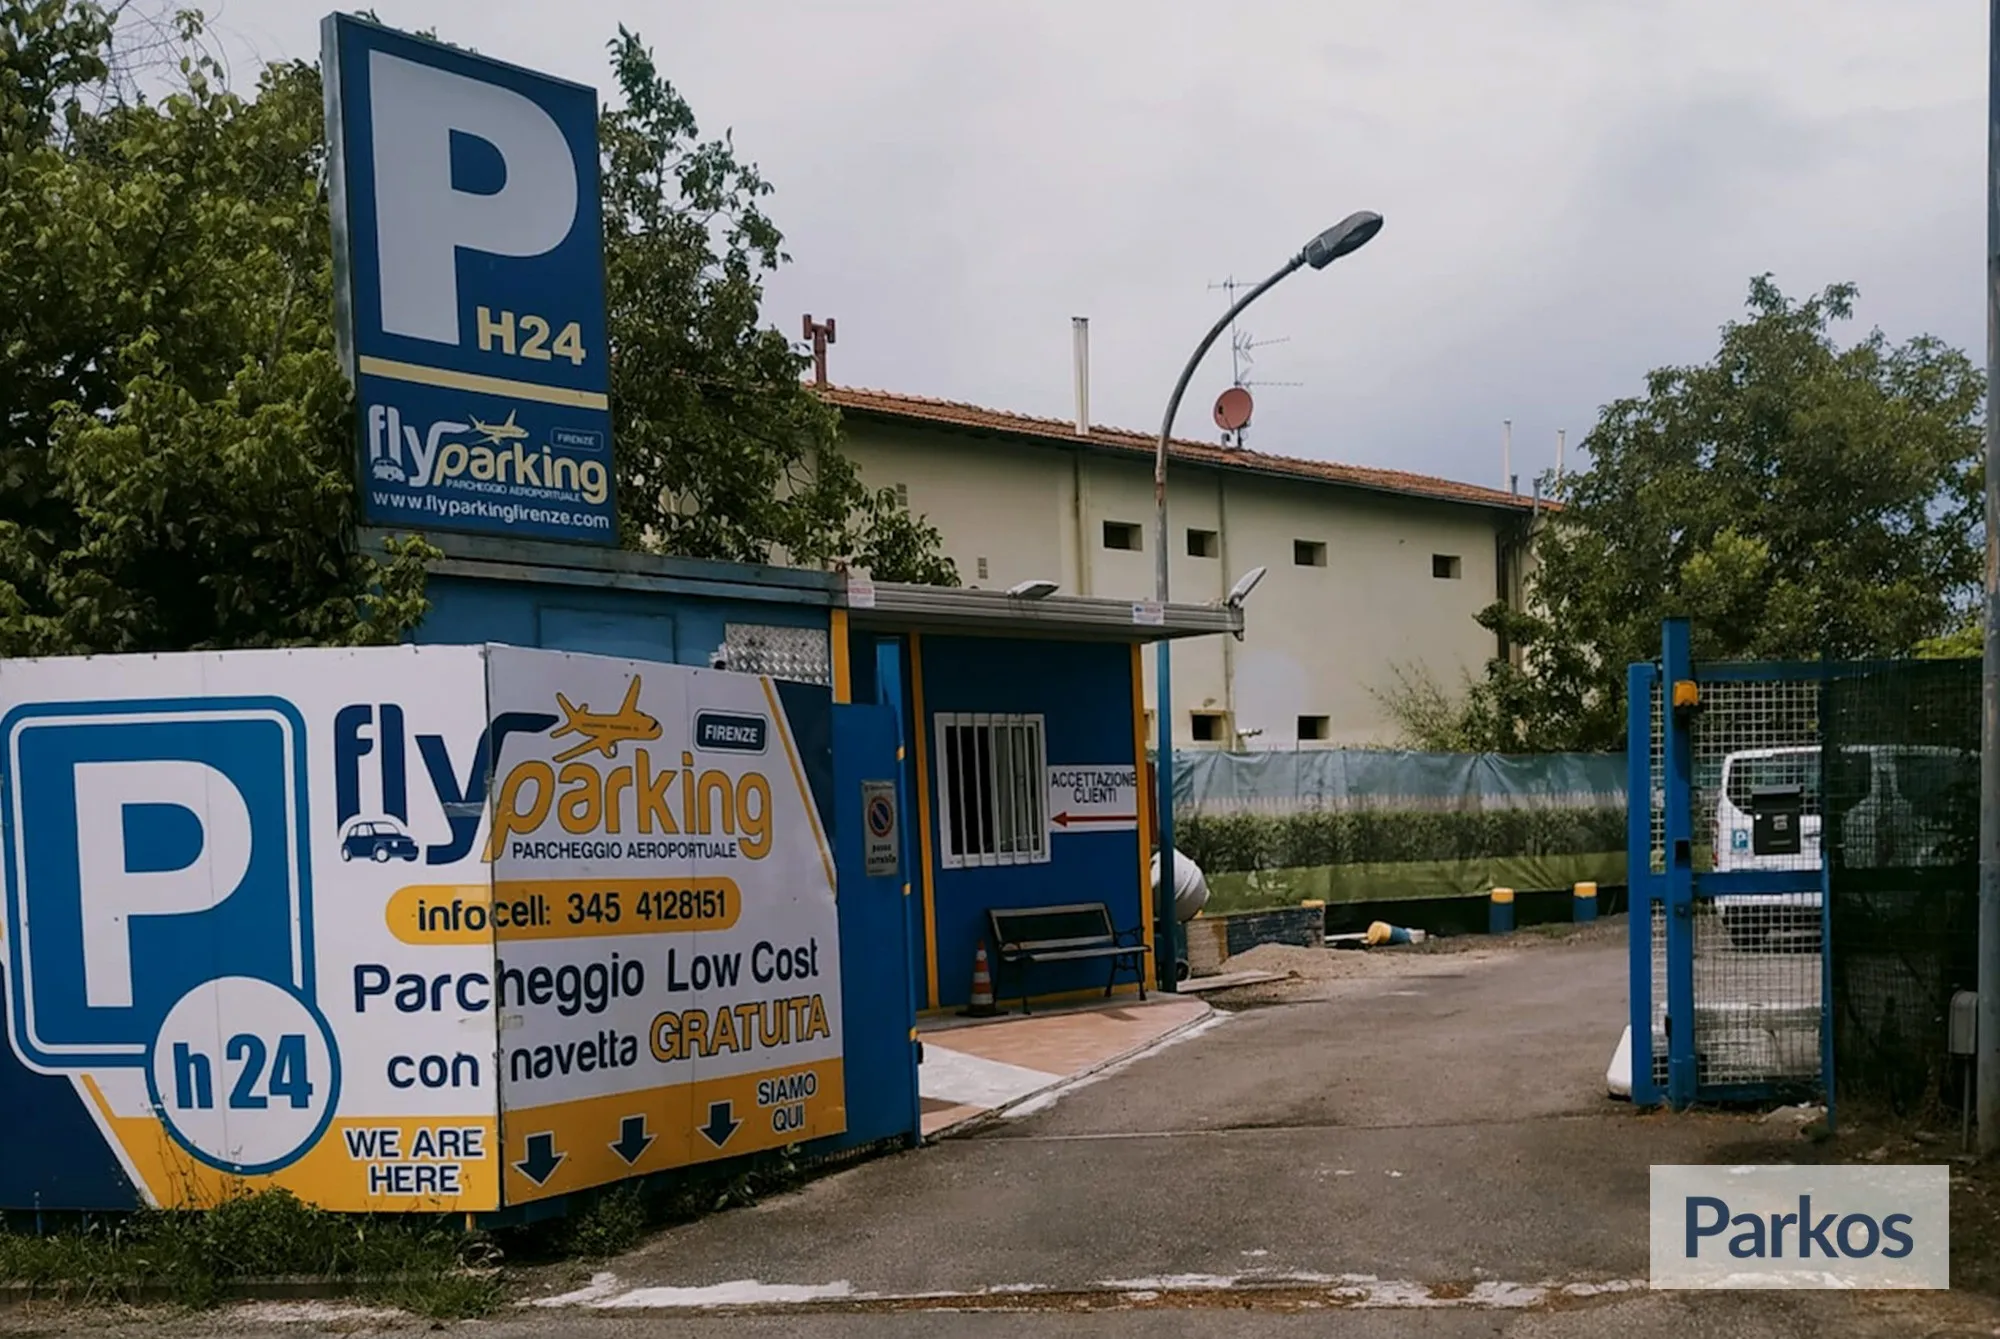 Car & Fly Parking Firenze (Paga online) - Florence Airport Parking - picture 1